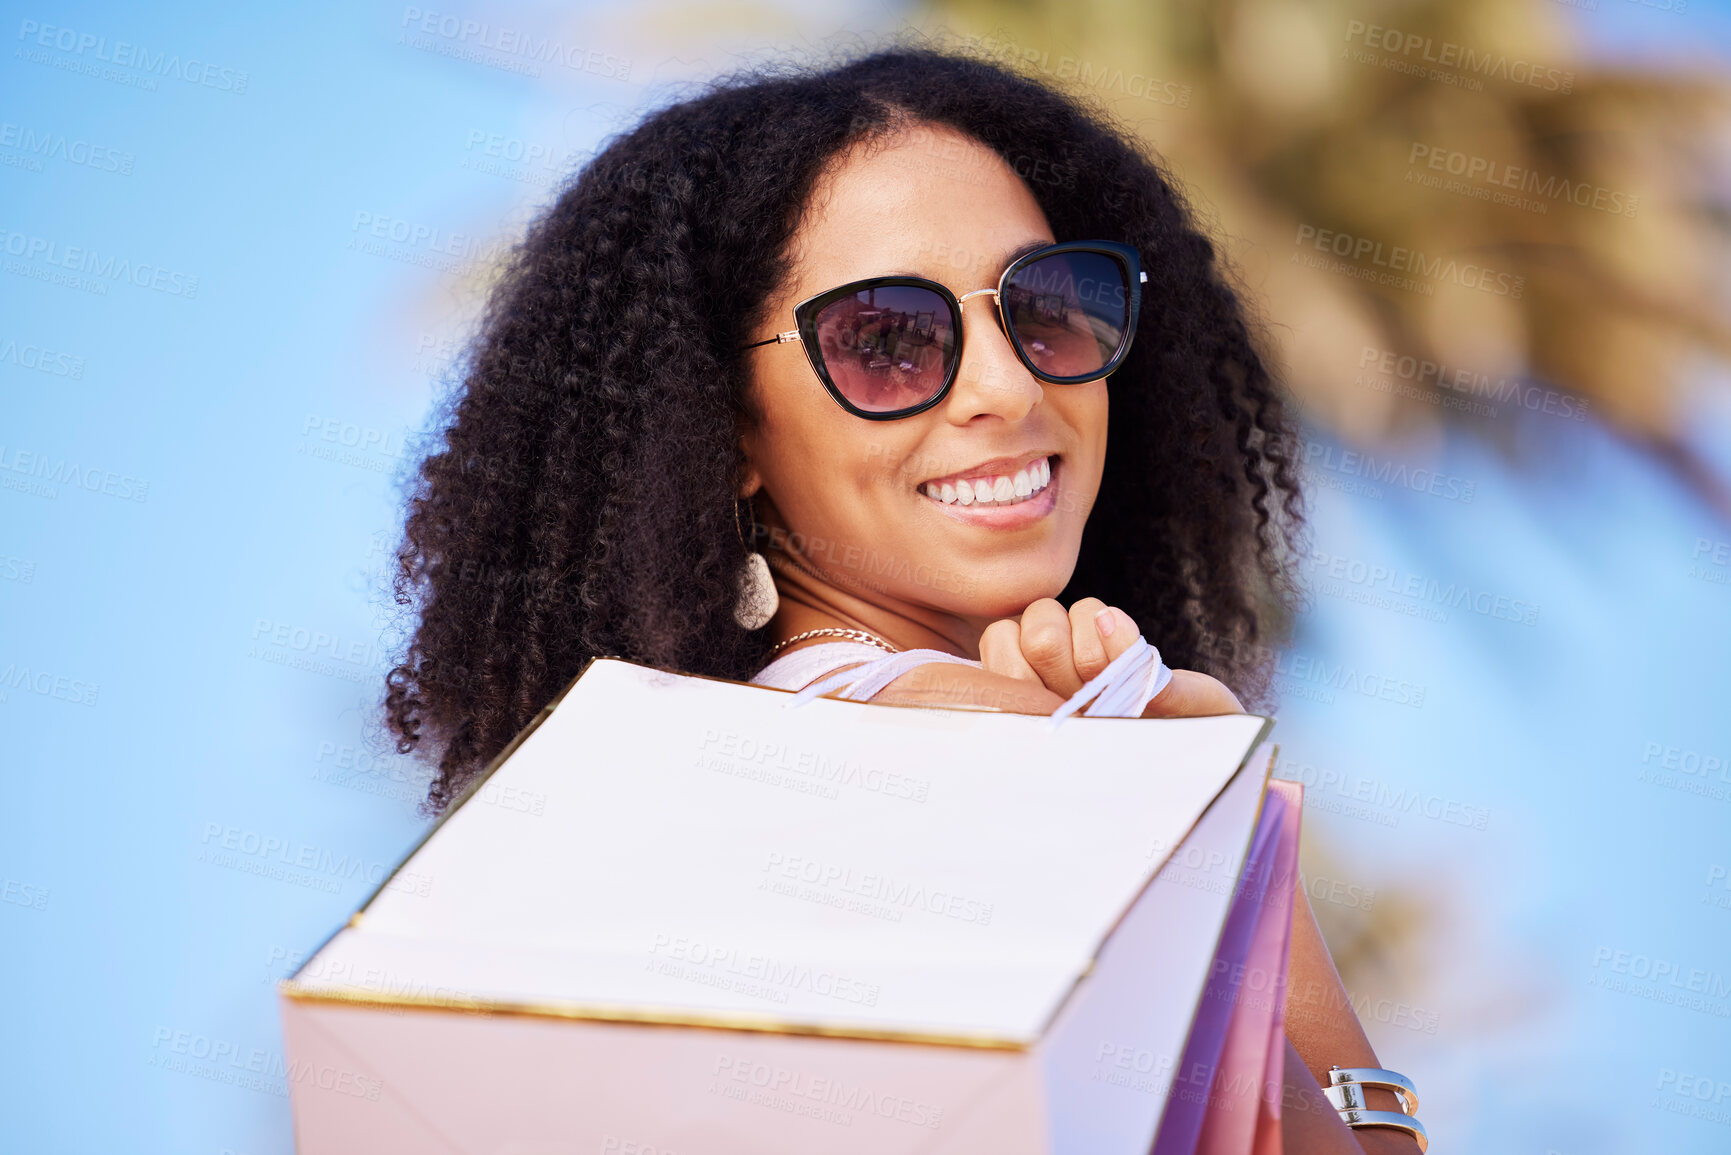 Buy stock photo Freedom, summer and girl with shopping bag portrait and smile in sunny Los Angeles, USA. Happy, consumerism and trendy black woman fashionista girl with retail bags for stylish lifestyle.

